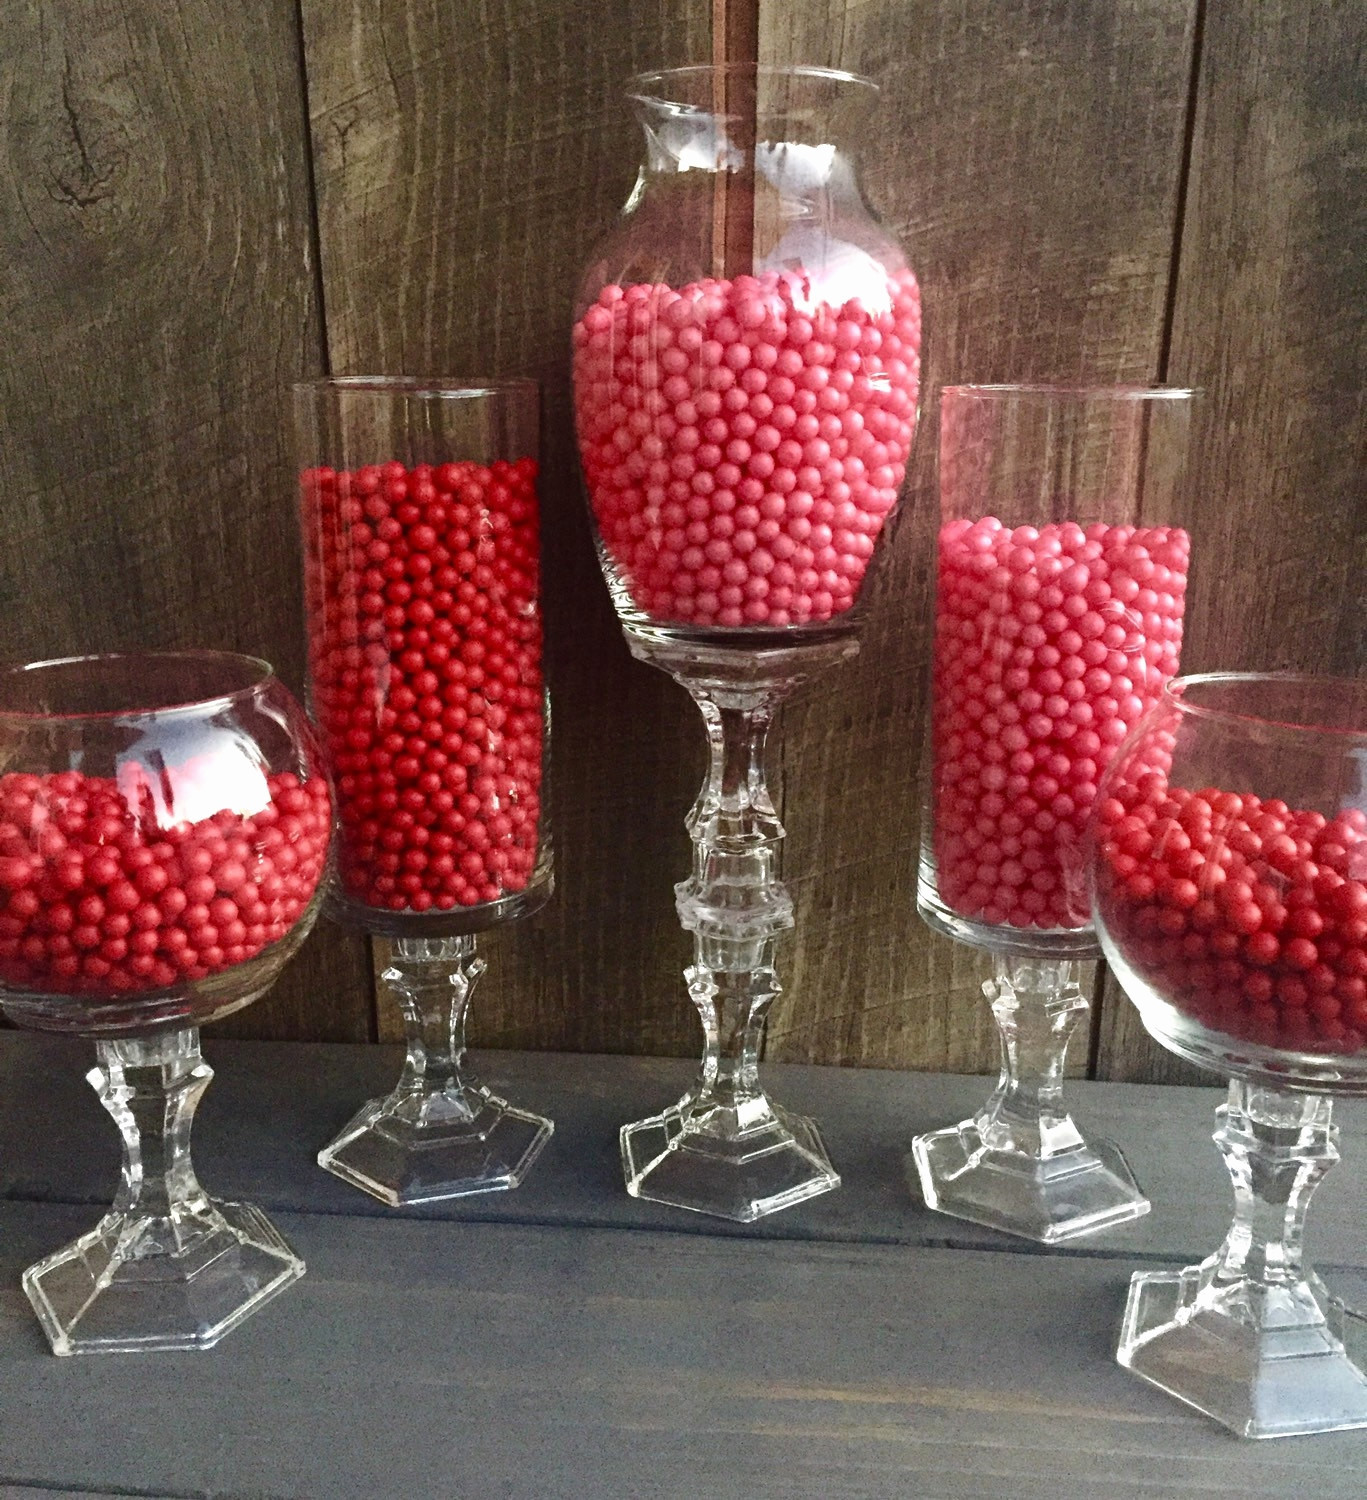 11 Perfect Red and White Glass Vase 2024 free download red and white glass vase of glass jar vase gallery jar flower 1h vases bud wedding vase intended for glass jar vase image glass jars for candy buffet new candy 20buffet 20containersh vases o